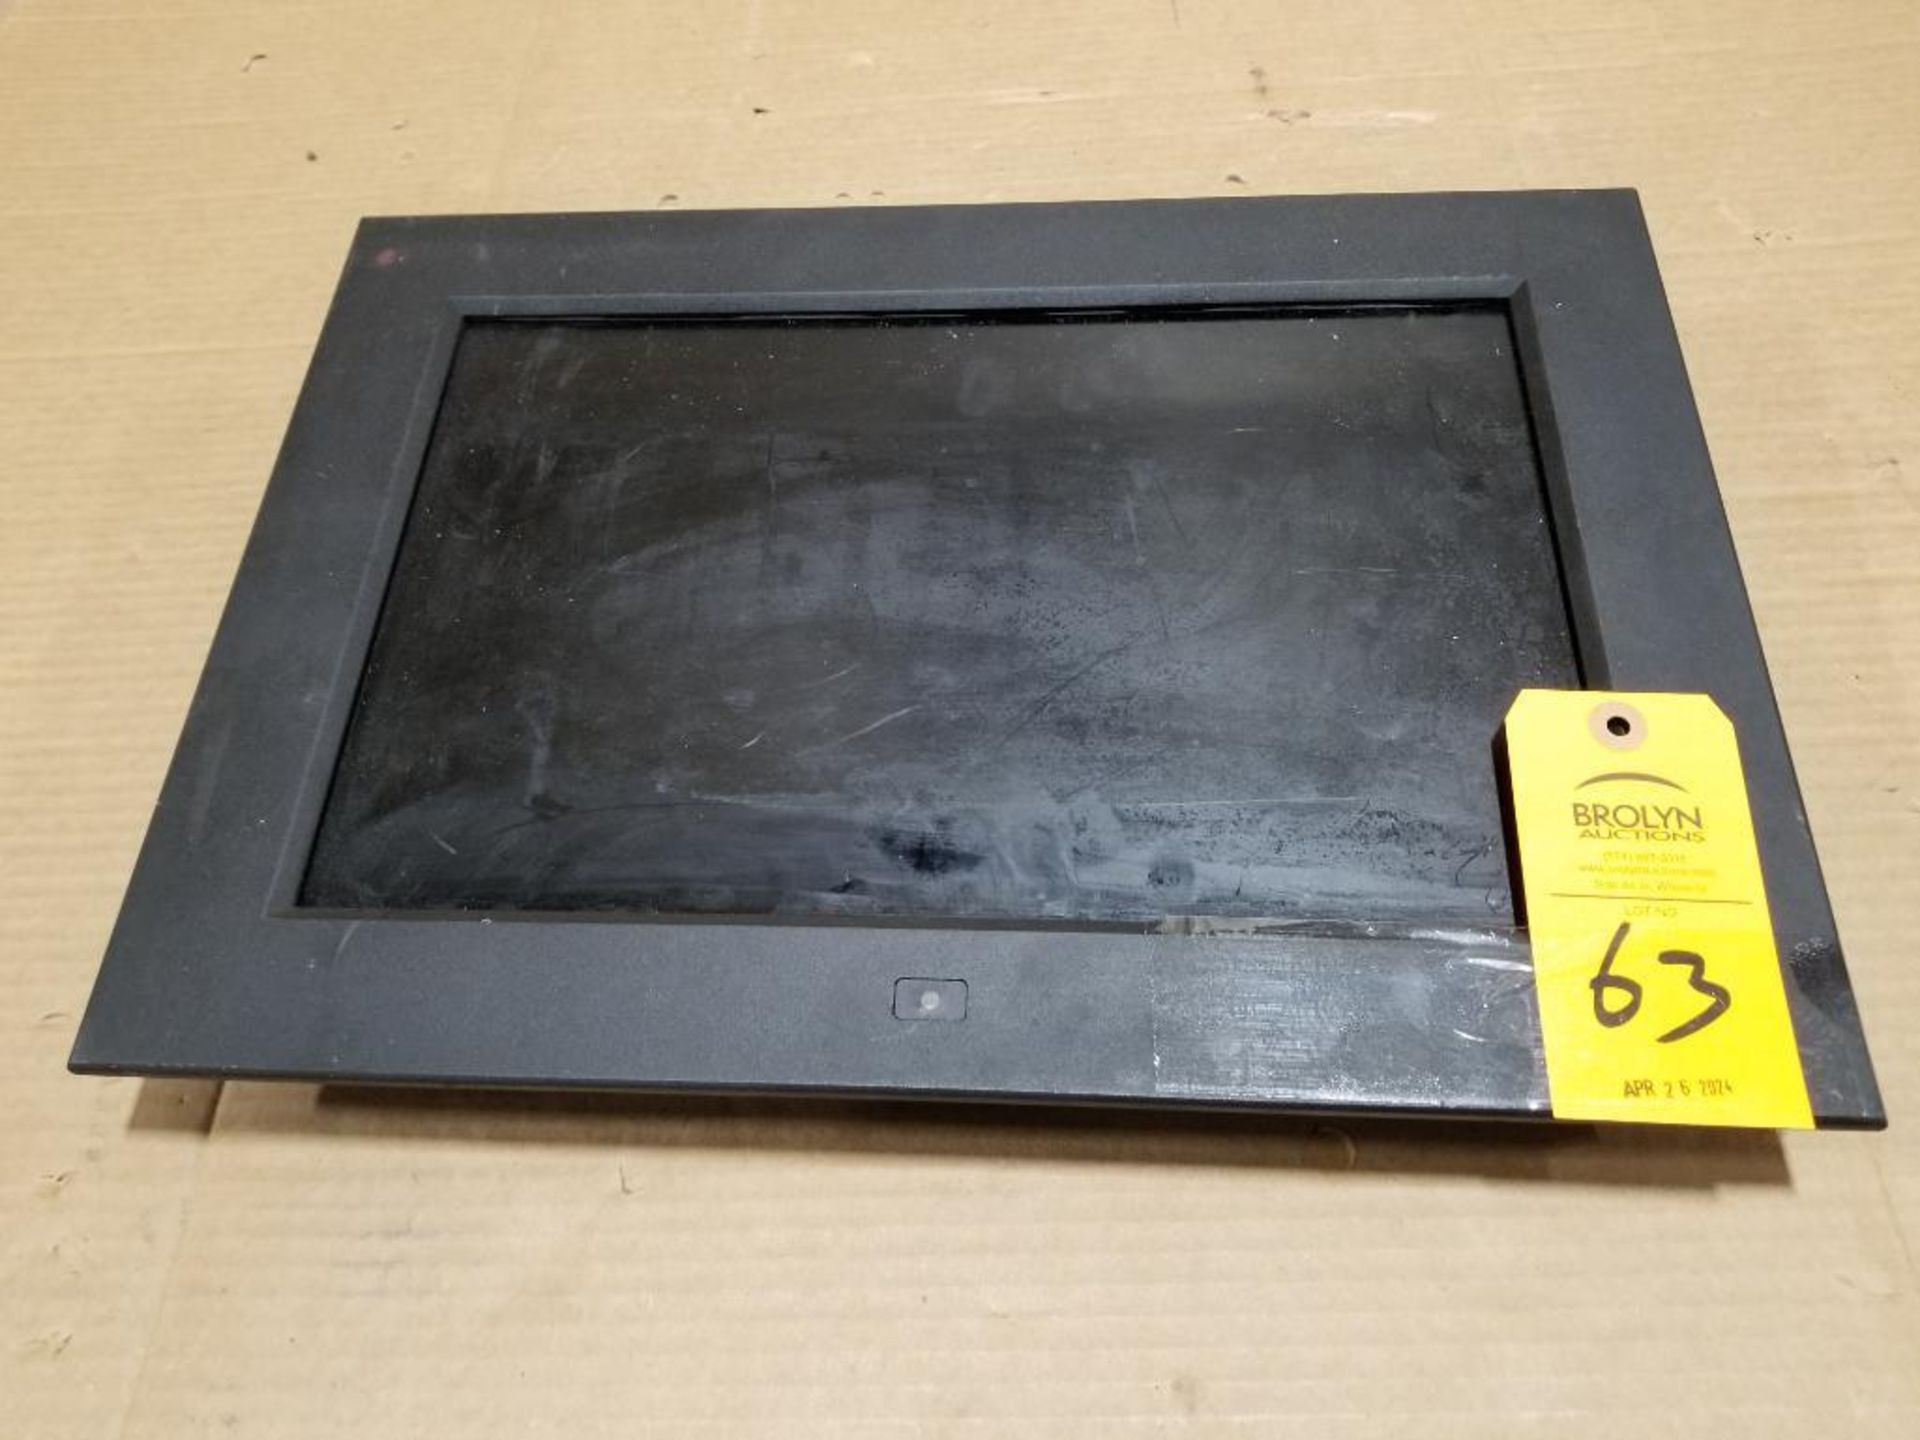 Industrial Monitor. Part number ID-E17Aw.